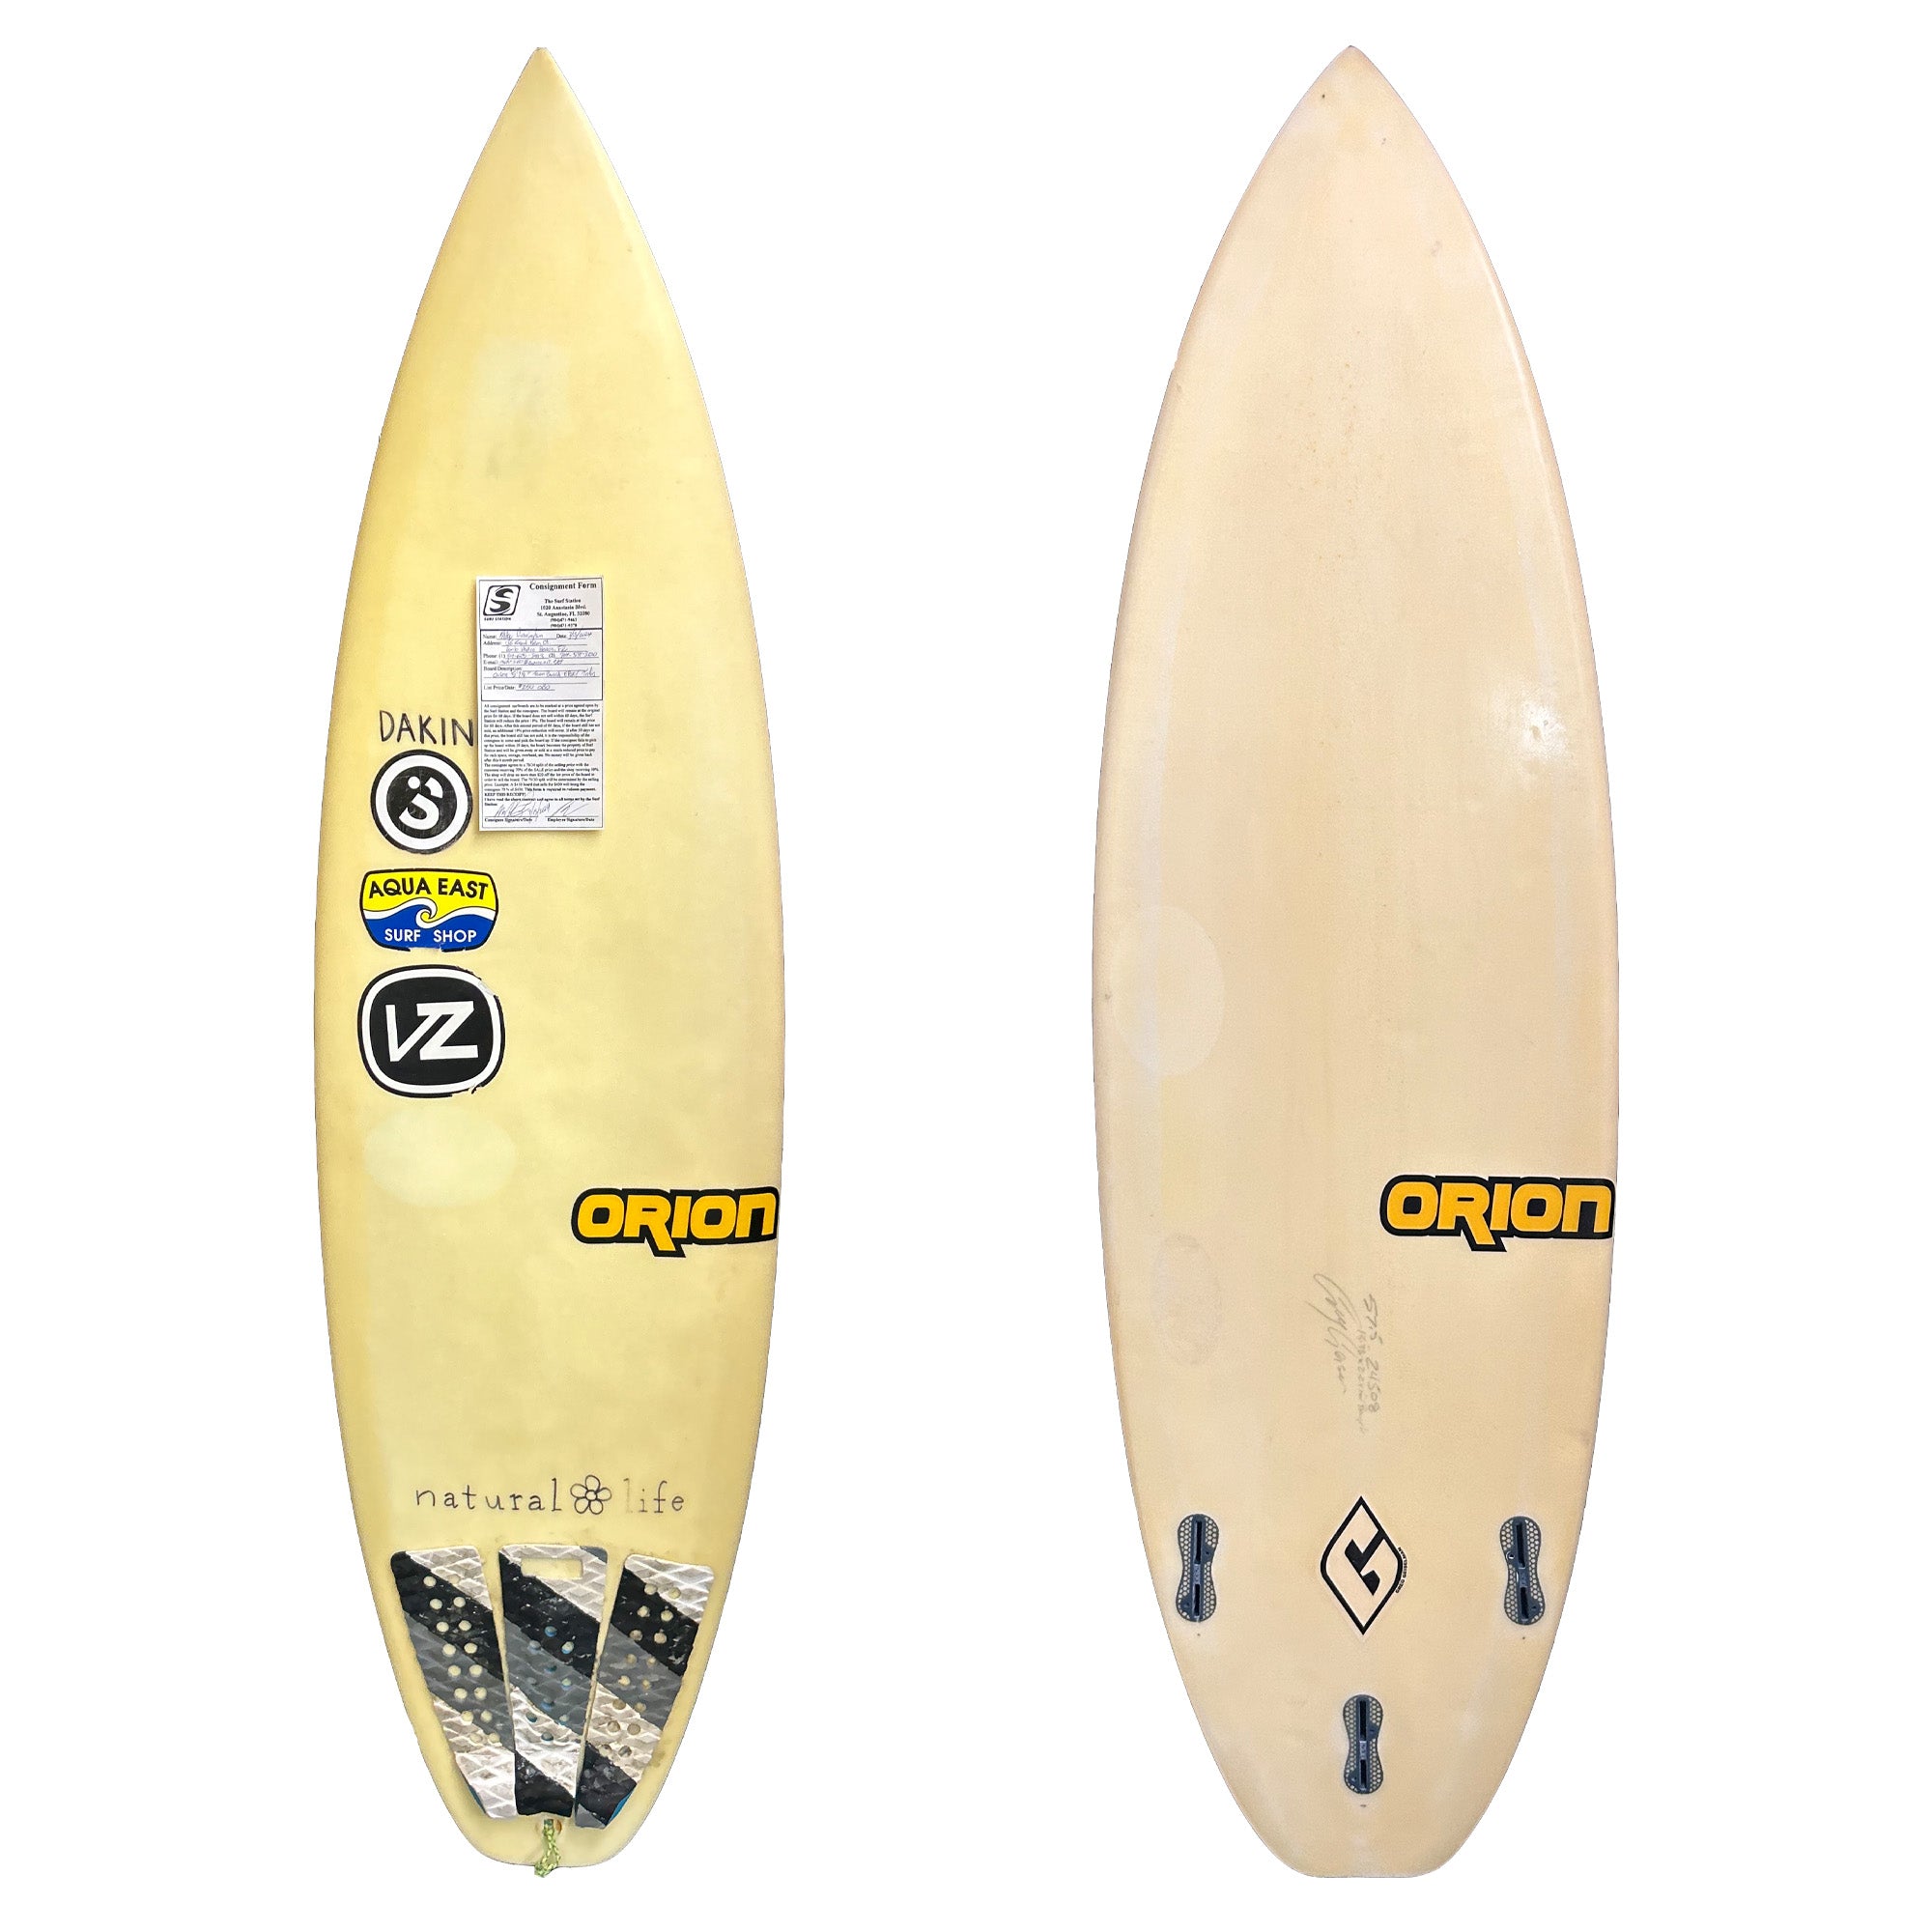 Orion 5'7 1/2" Consignment Surfboard